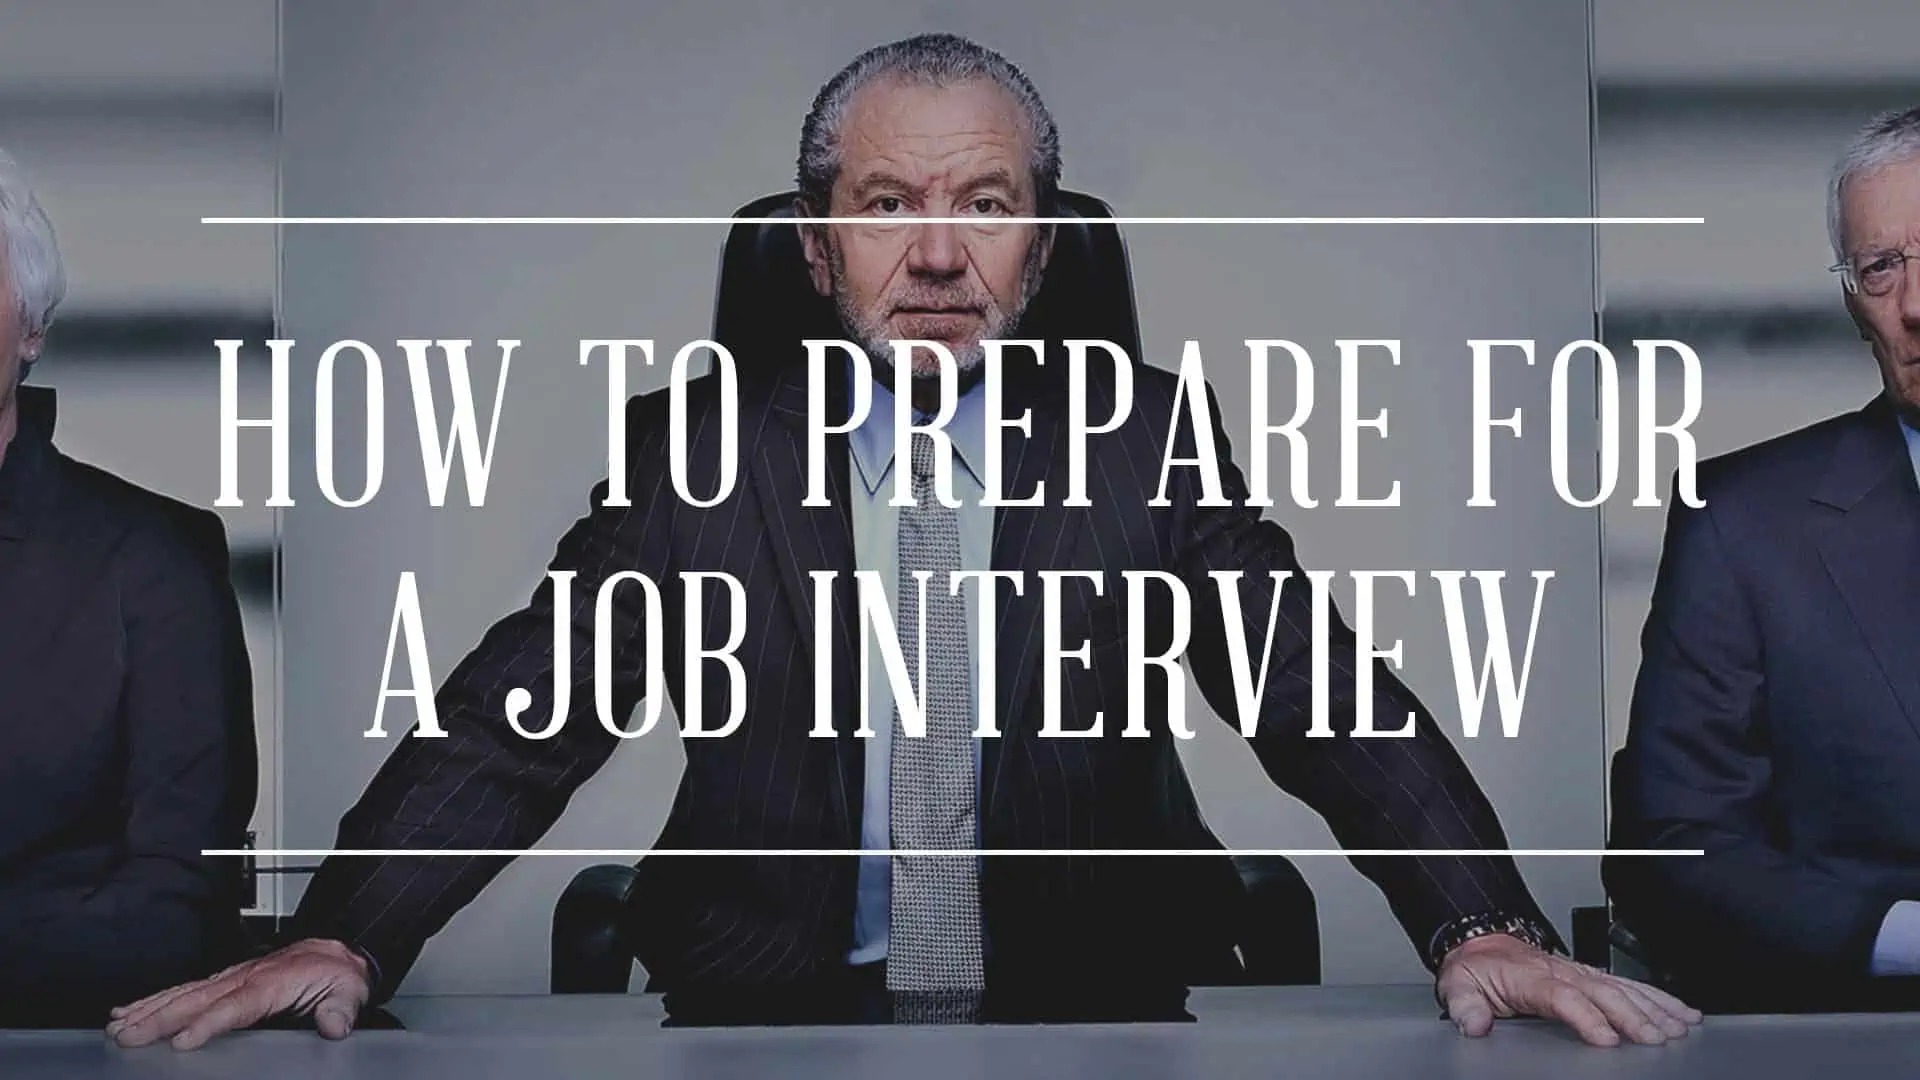 How To Prepare For A Job Interview